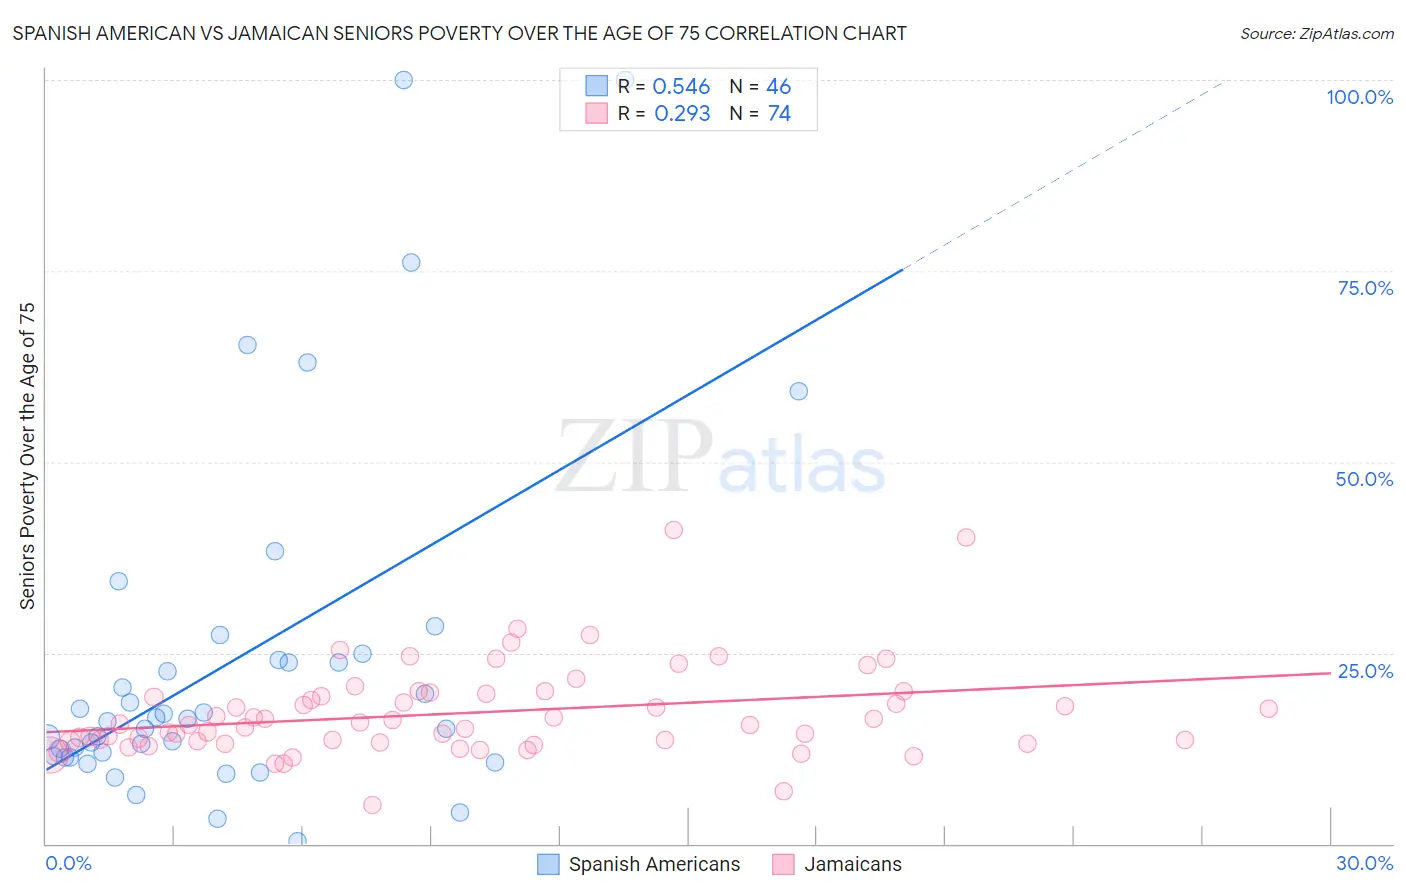 Spanish American vs Jamaican Seniors Poverty Over the Age of 75